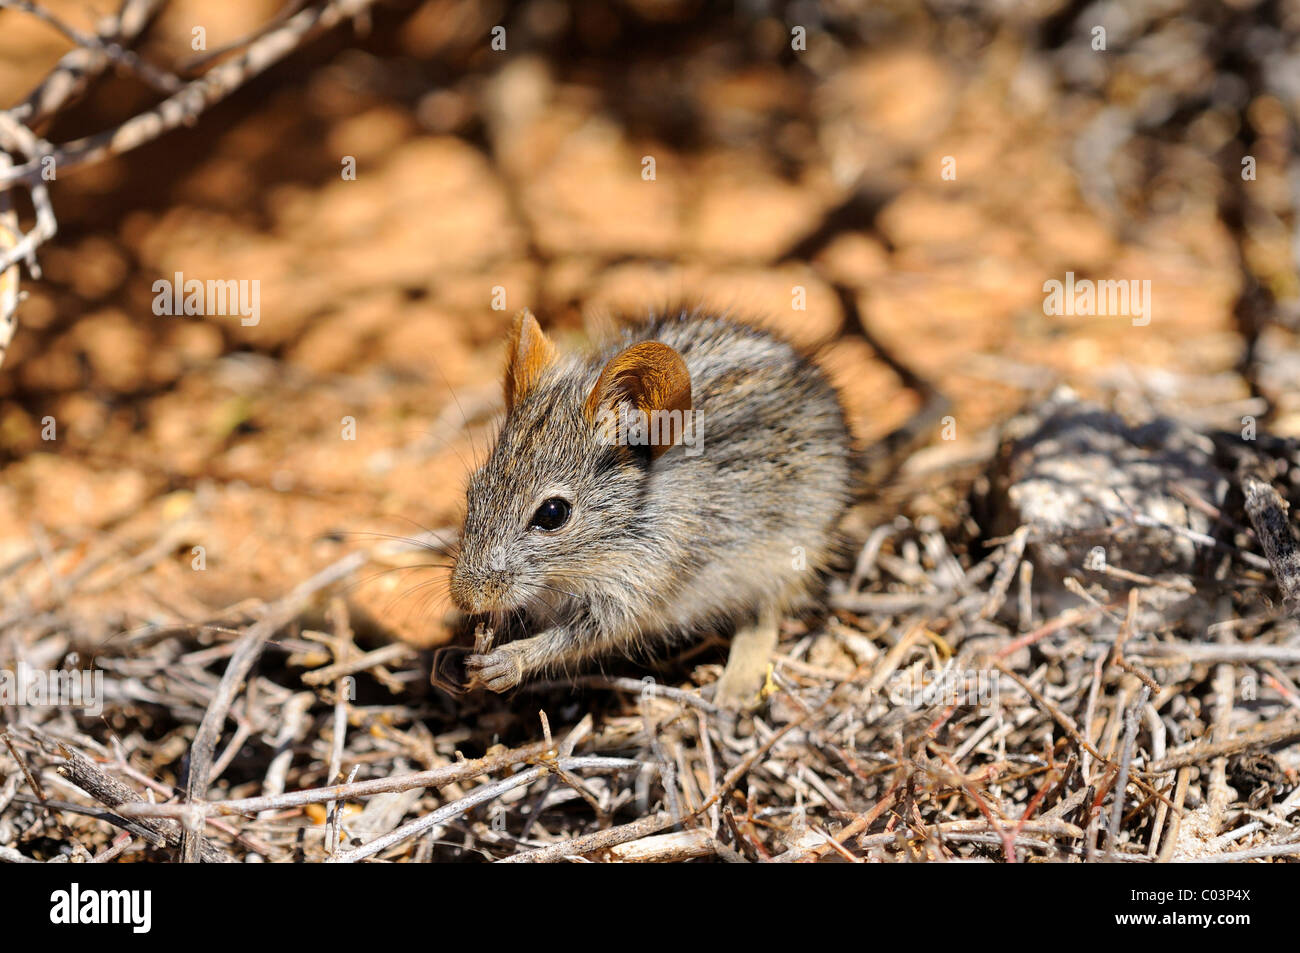 Four-striped grass mouse, Rhabdomys pumilio, in the natural habitat, Goegap Nature Reserve, Namaqualand, South Africa Stock Photo